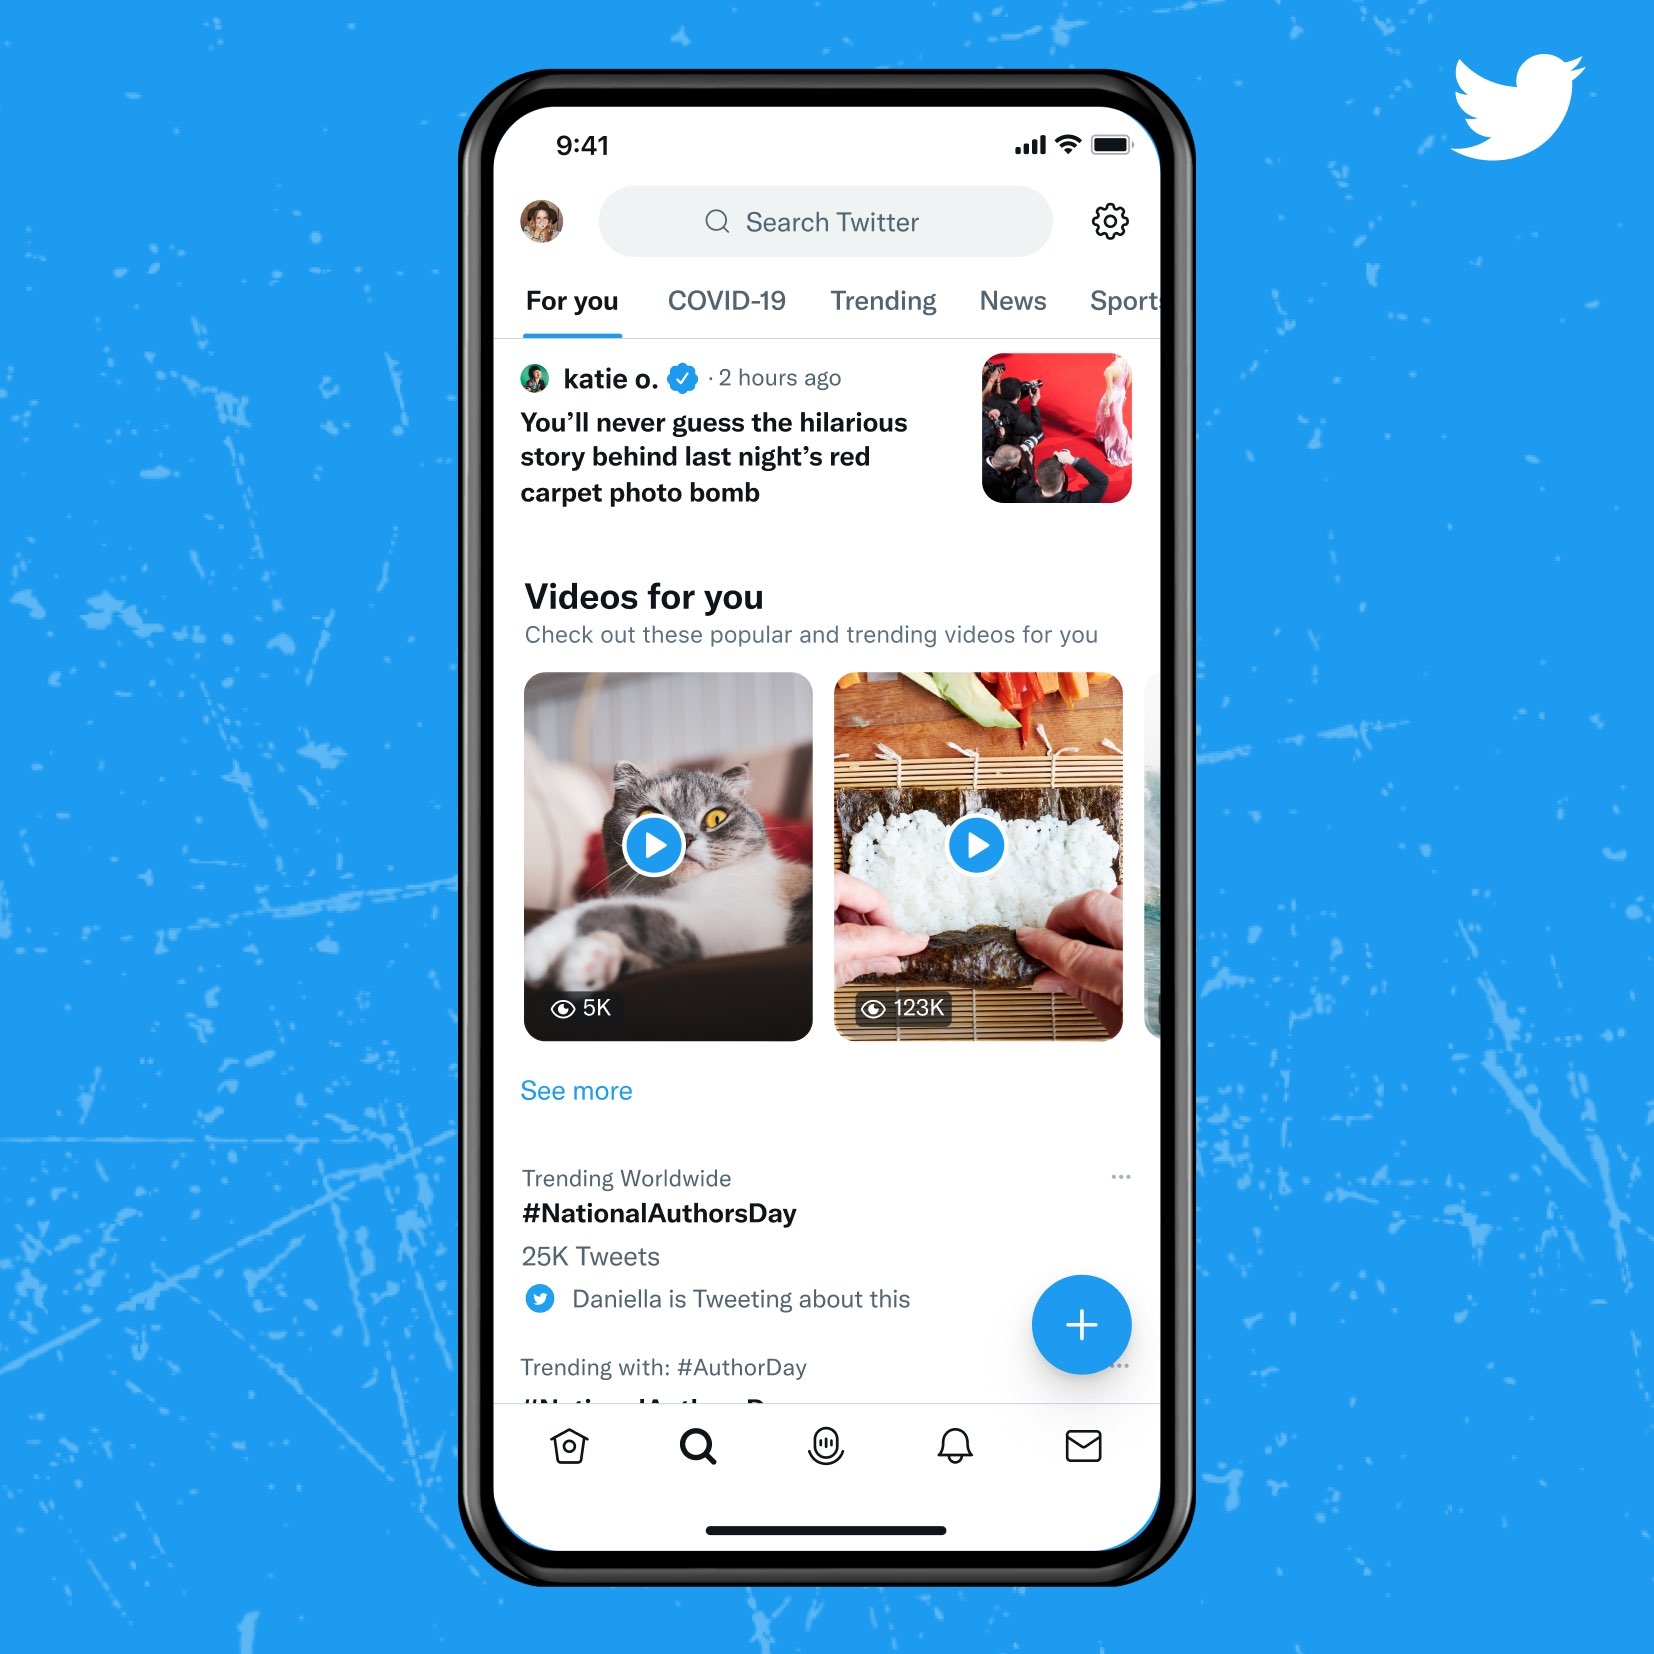 How To Download Videos on TWITTER X, 4K, No App